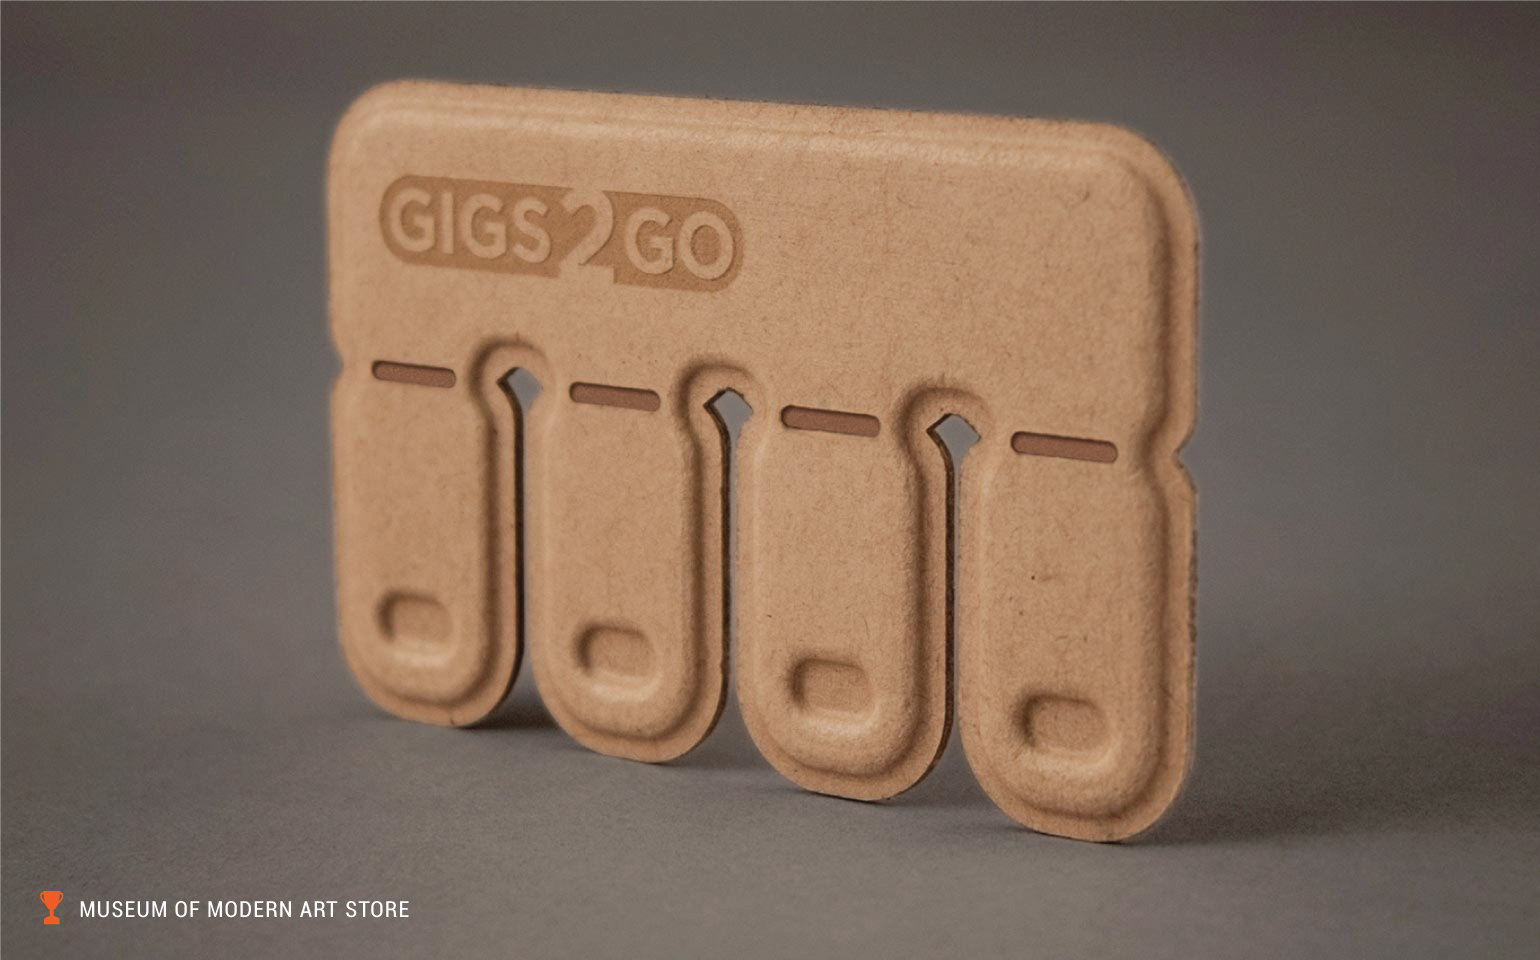 Gigs2Go Product Example